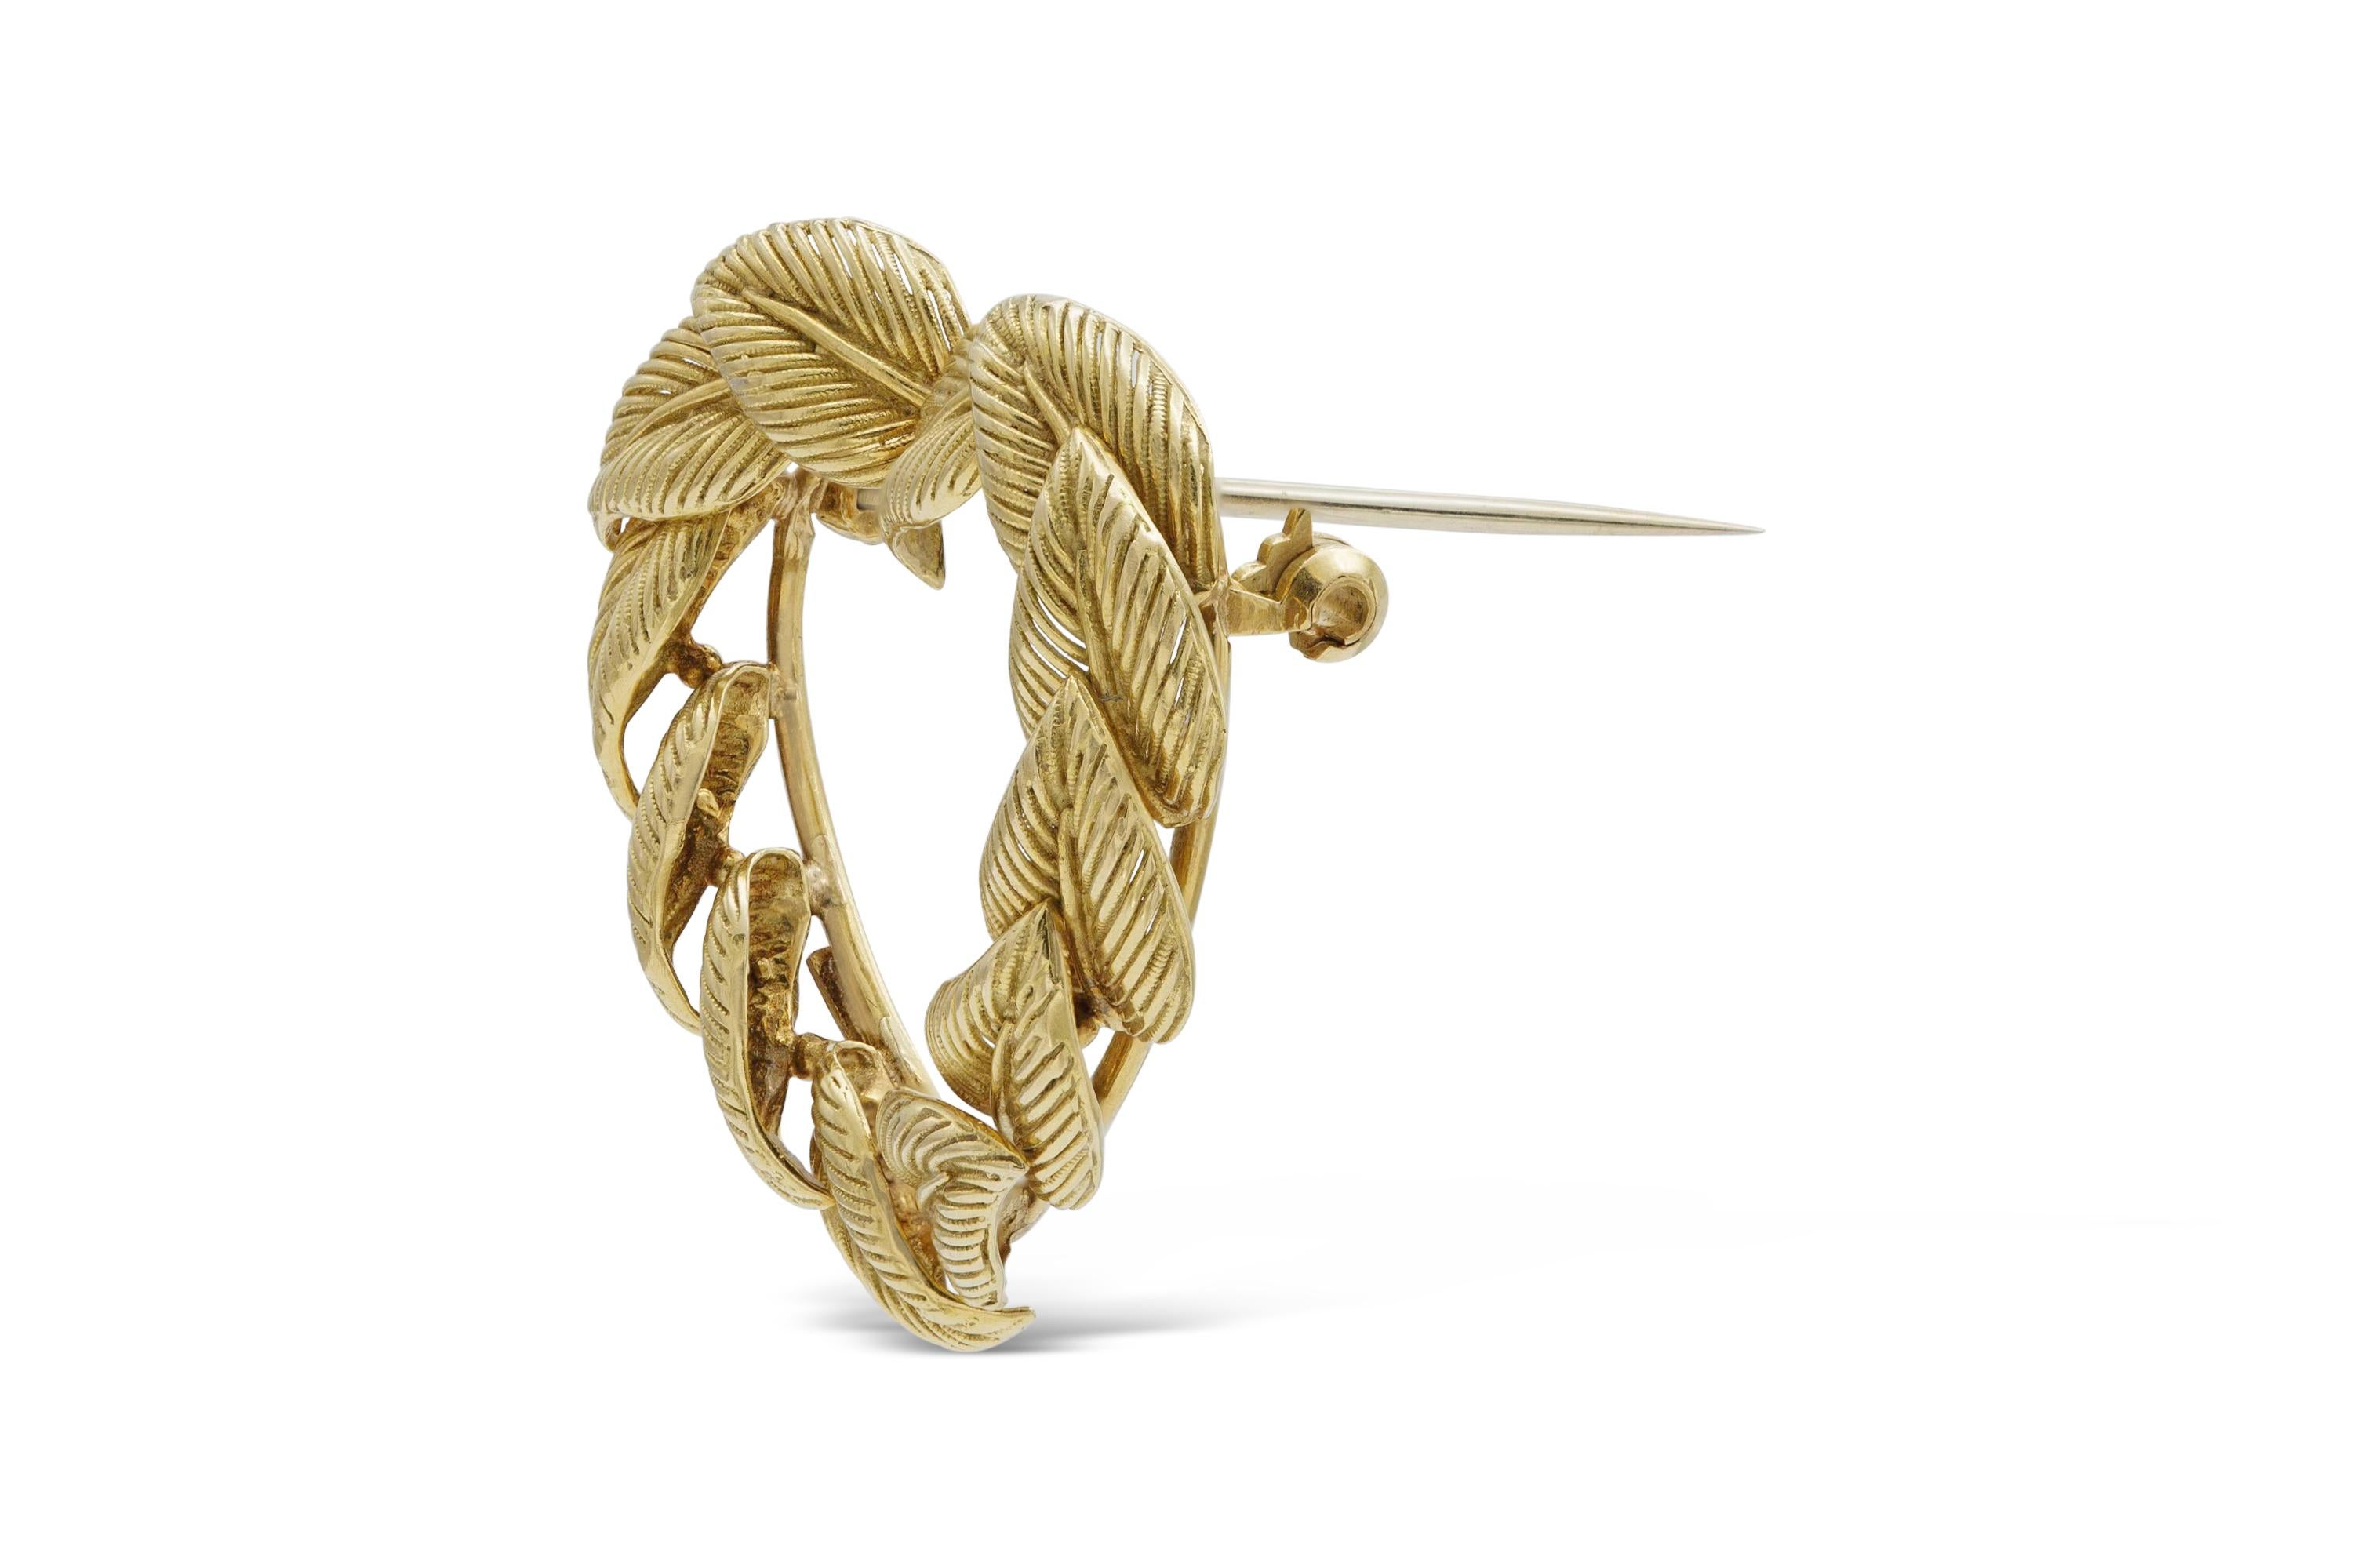 Finely crafted in 18k yellow gold.
Signed by Tiffany & Co.